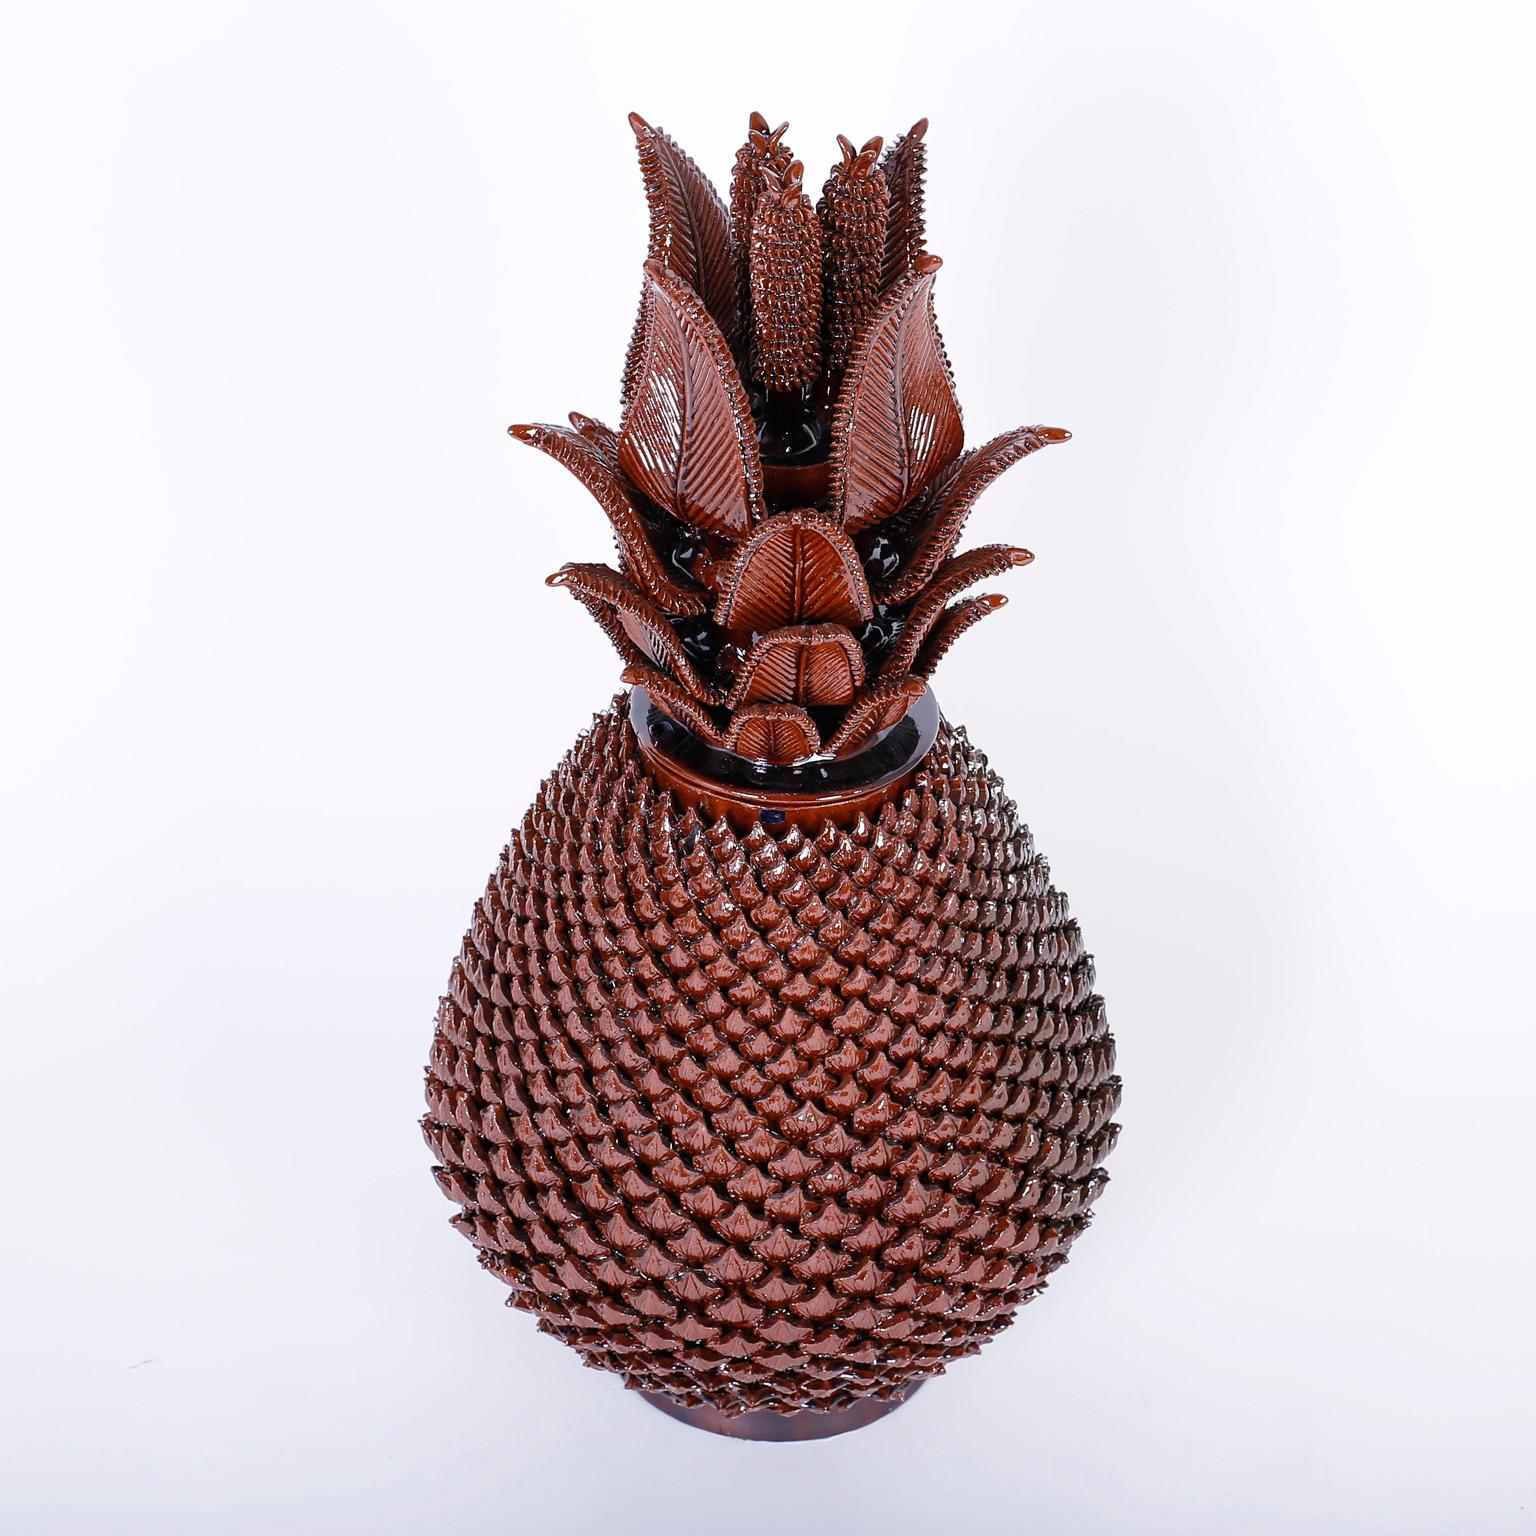 Brown glazed terracotta lidded pineapple urn with an impressive display of pottery prowess, featuring a dramatic leaf and cone lid over an ambitious repeating husk pattern on the jar.